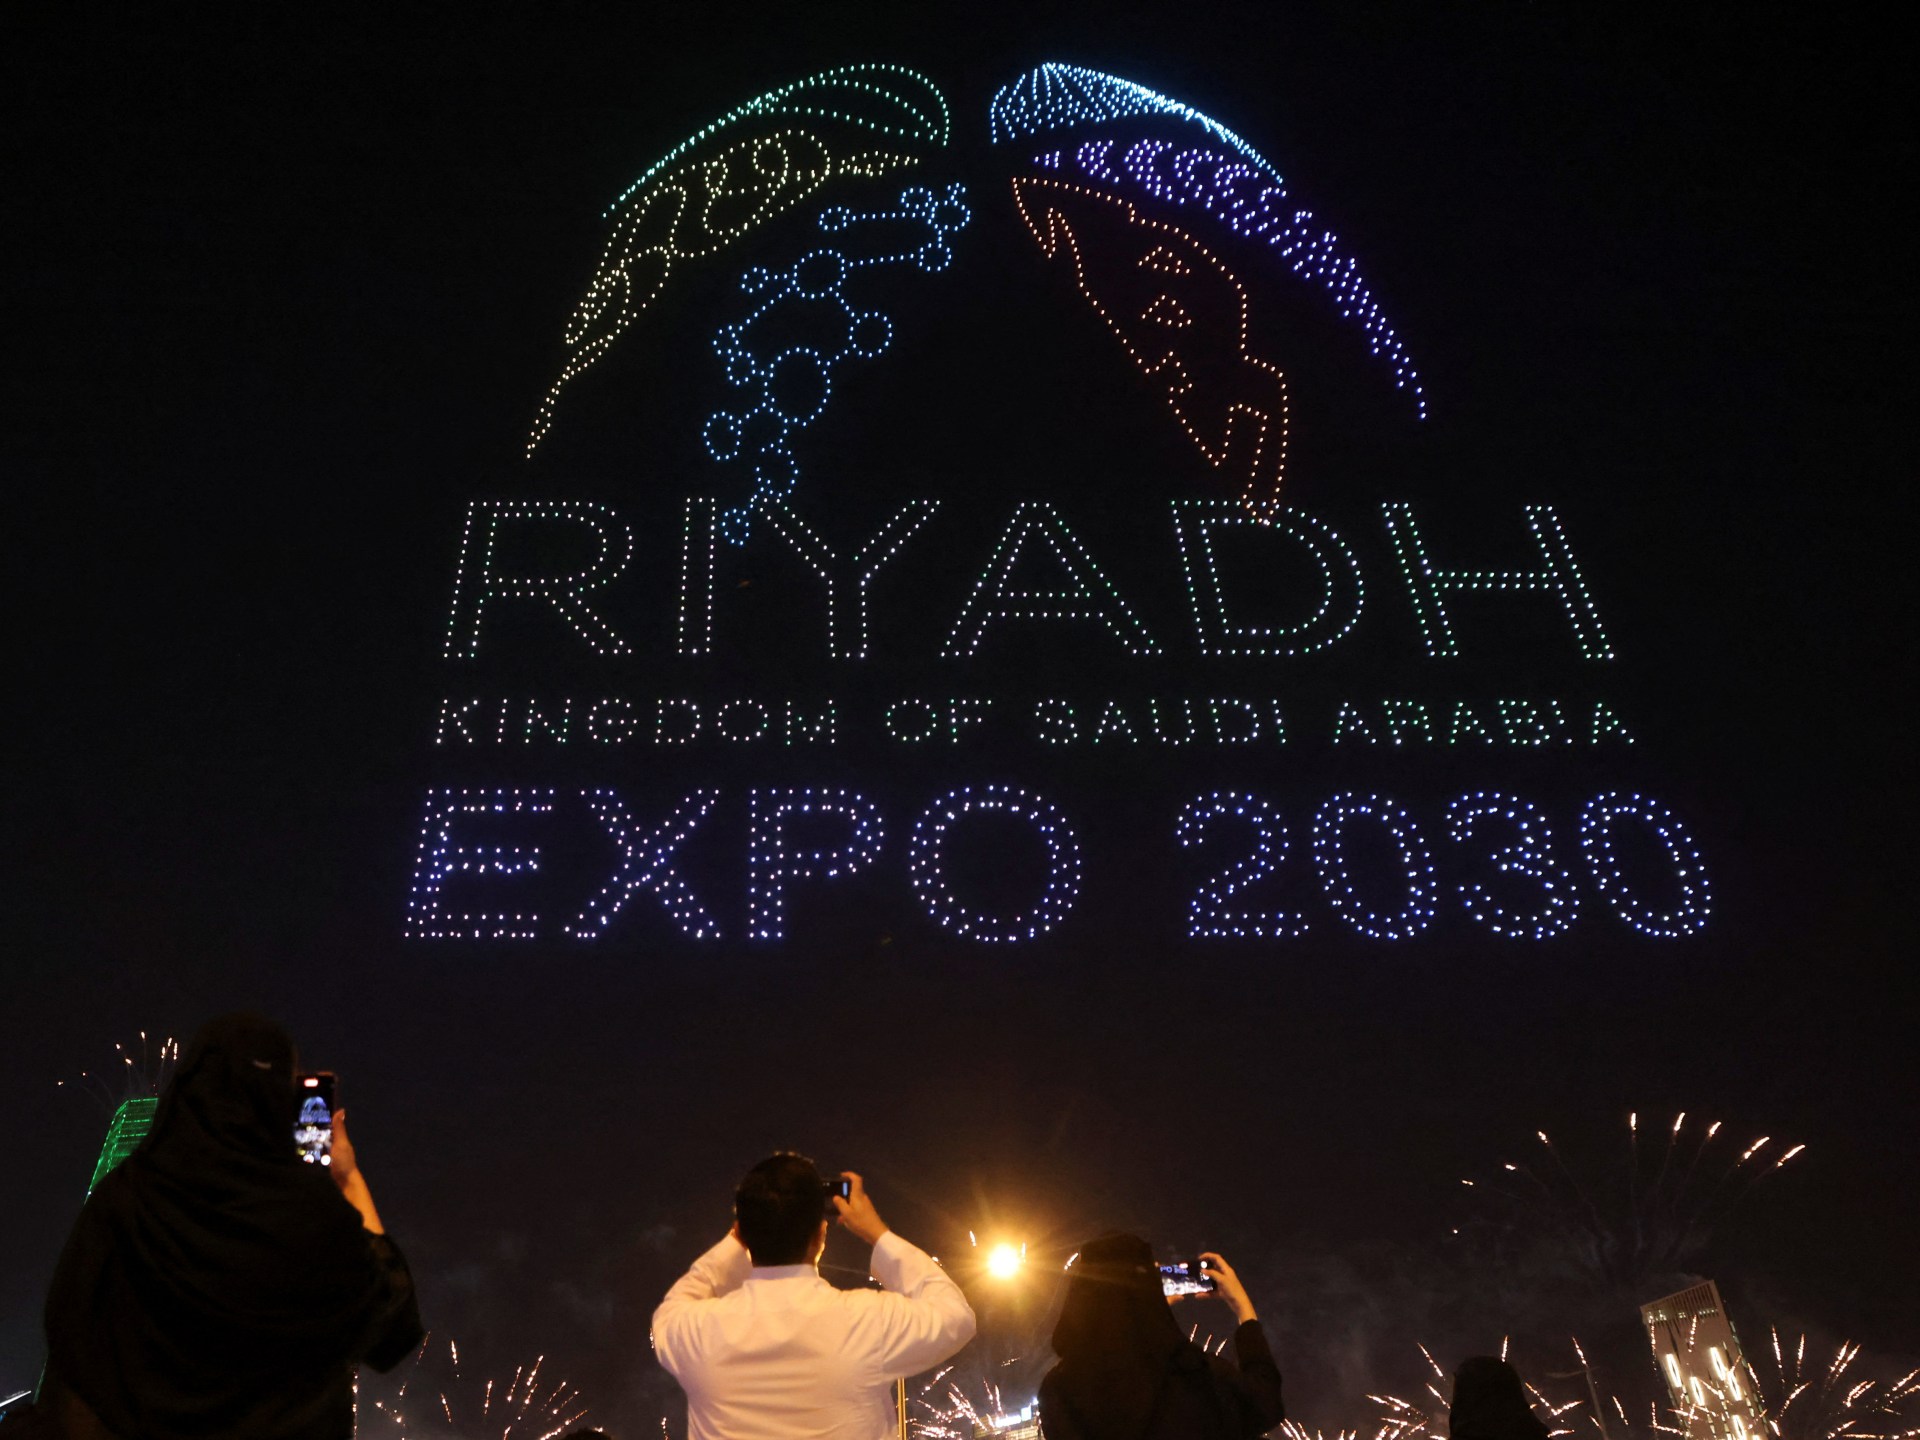 Saudi Arabia selected to host World Expo in 2030 | Entertainment News